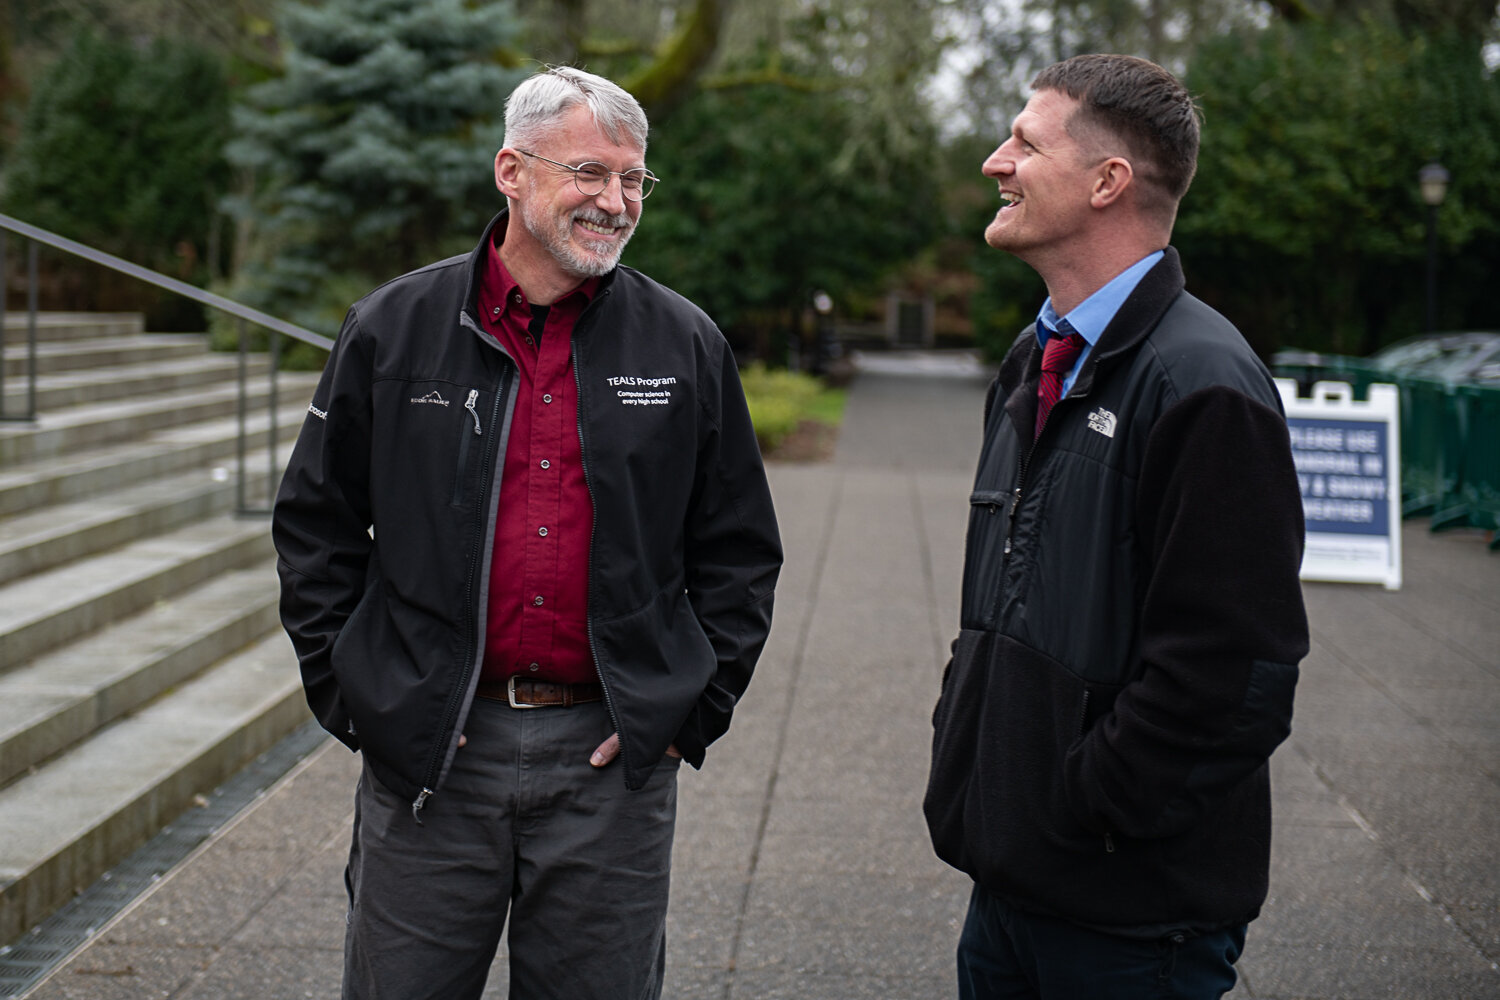 At right, state Rep. Joel McEntire, R-Cathlamet, smiles at a rally in Olympia held on the steps of the state legislative building on Jan. 31.